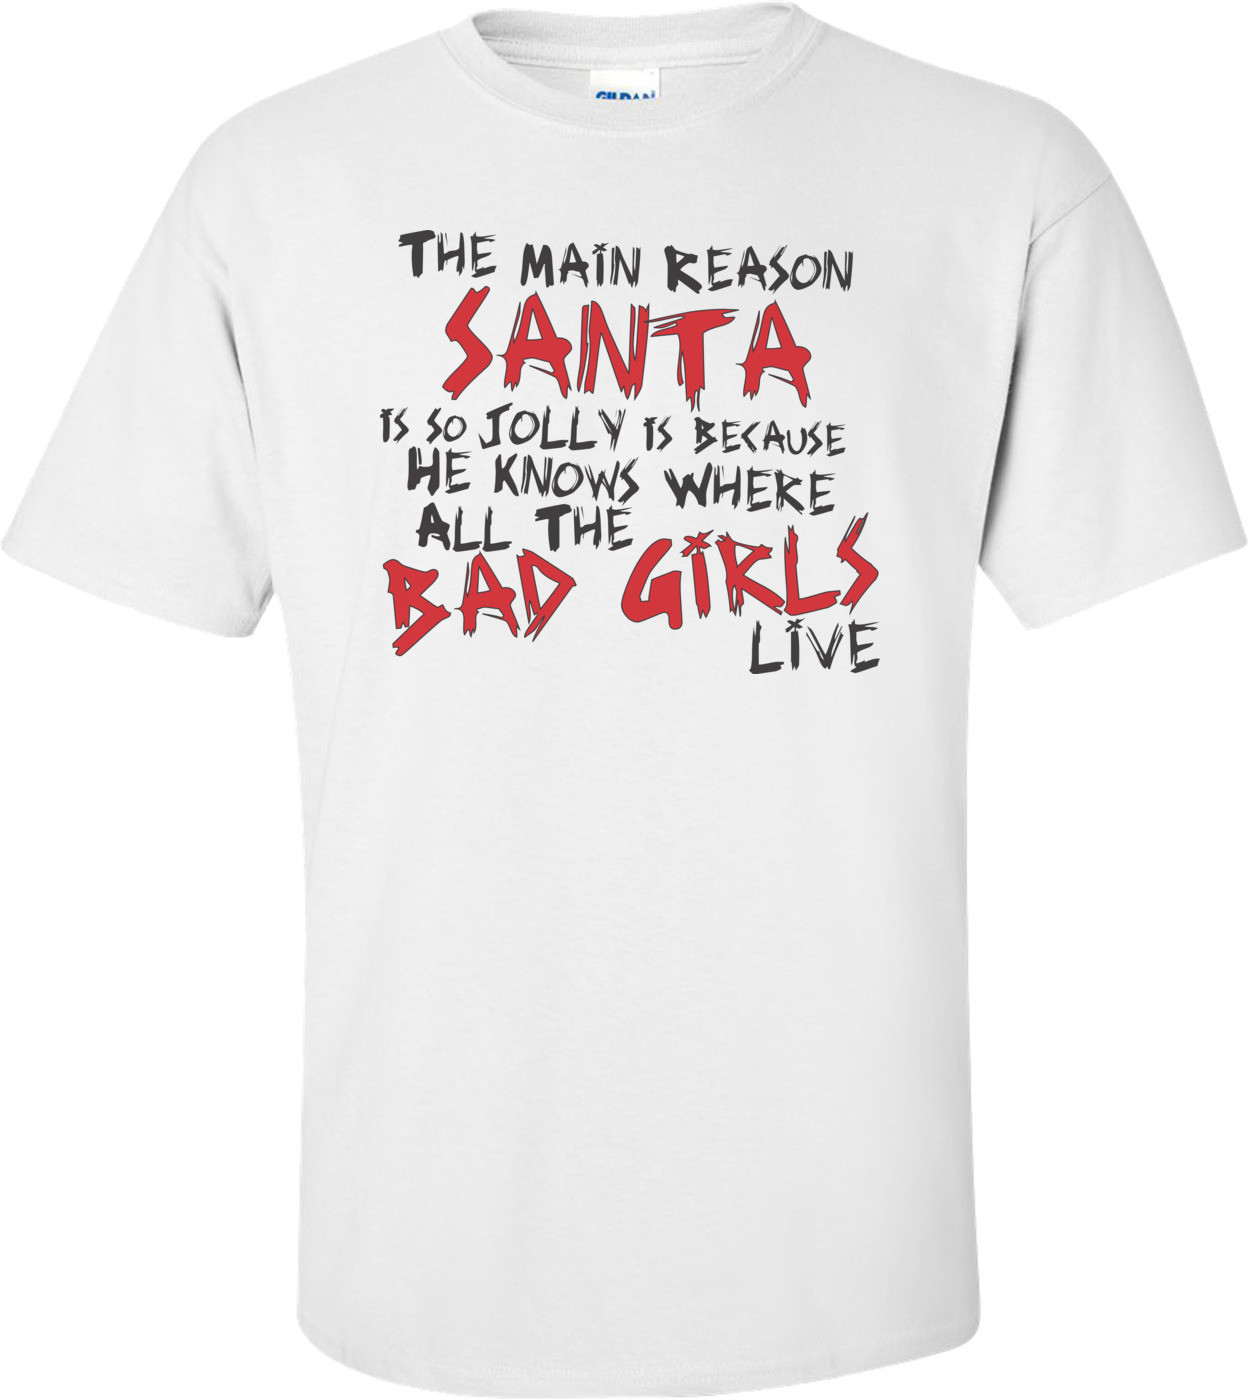 The Main Reason Santa Is So Jolly Is Because He Knows Where All The Bad Girls Live 